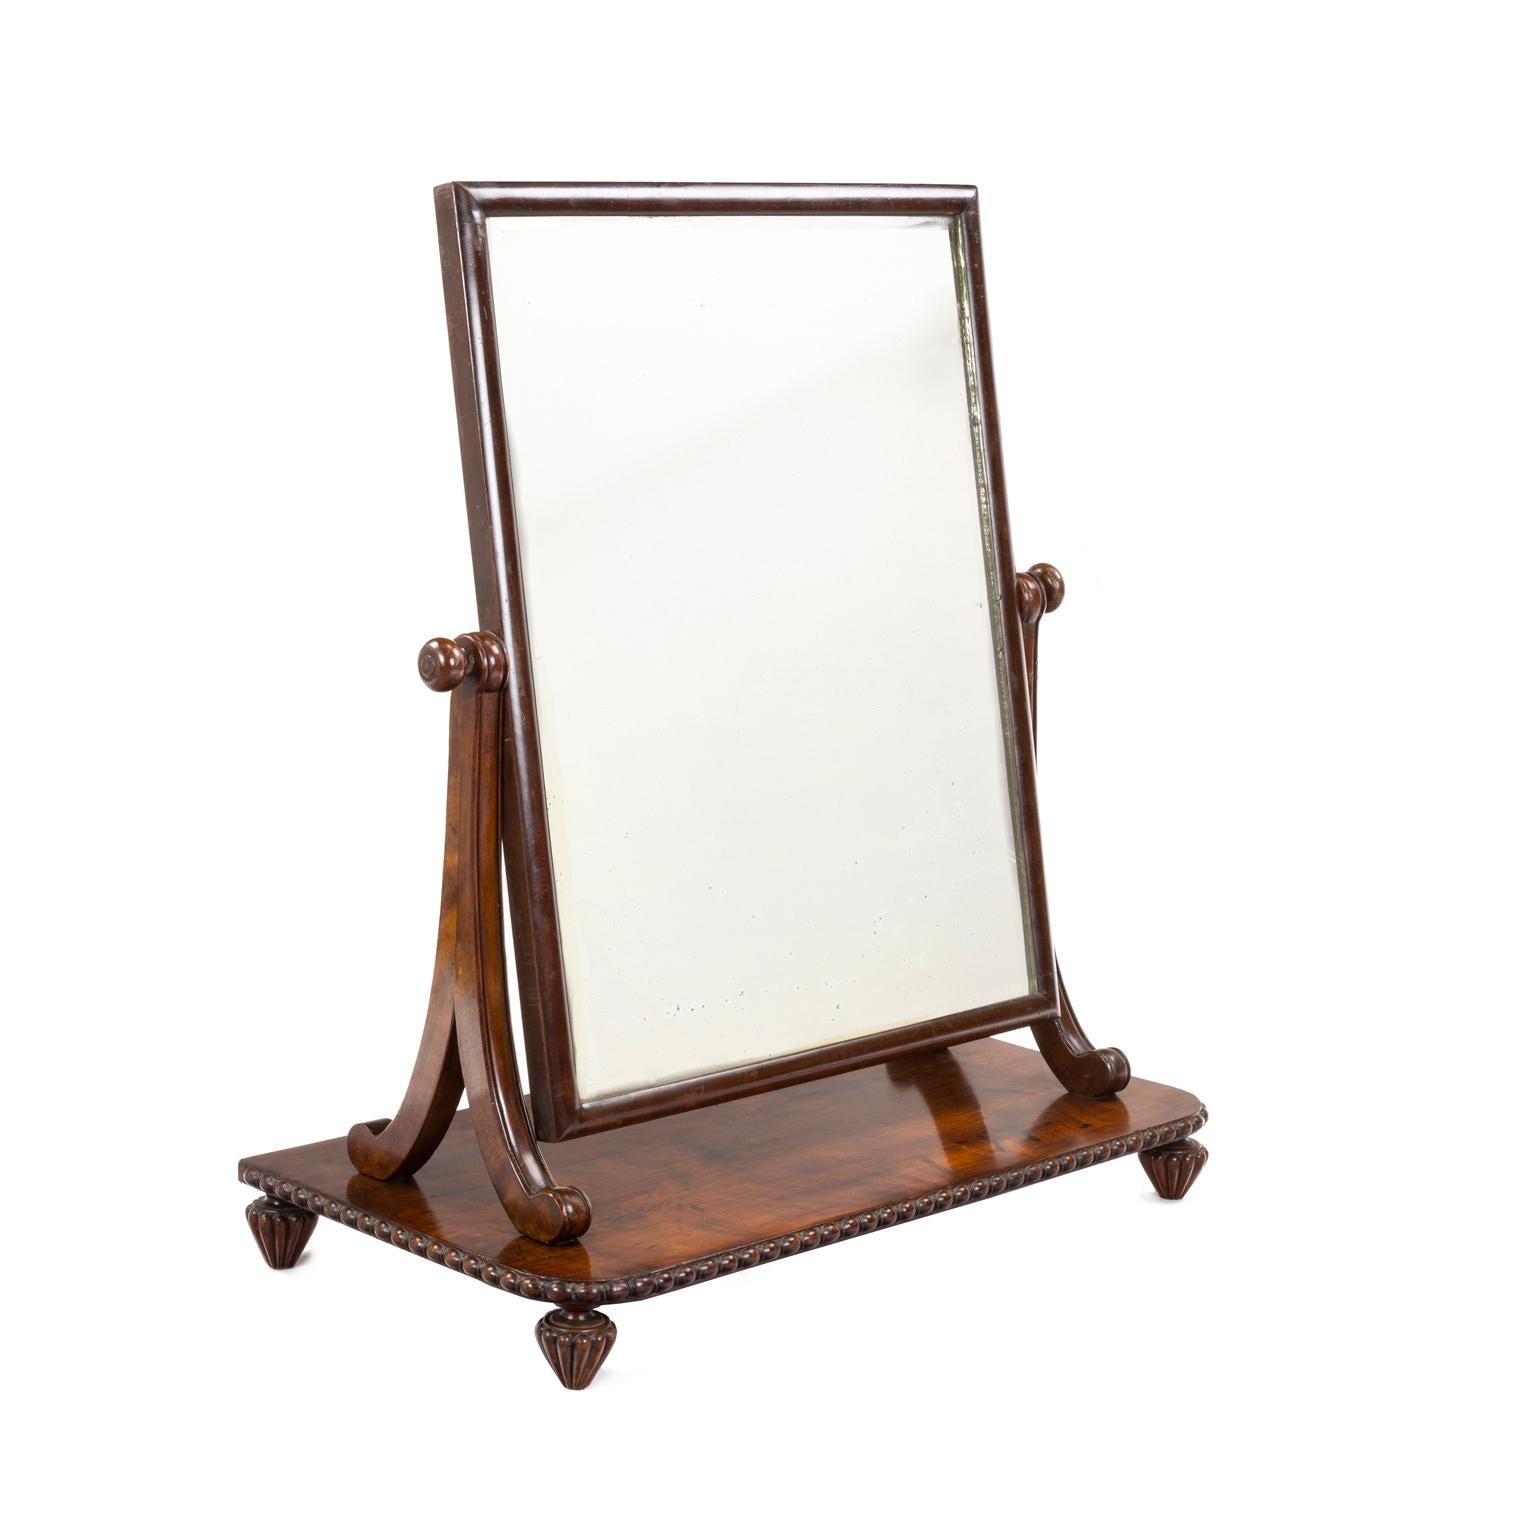 A fine quality dressing mirror attributed to Gillows of Lancaster and London, in mahogany.

Gillows of Lancaster and London, also known as Gillow & Co., was an English furniture making firm based in Lancaster, Lancashire, and in London. It was